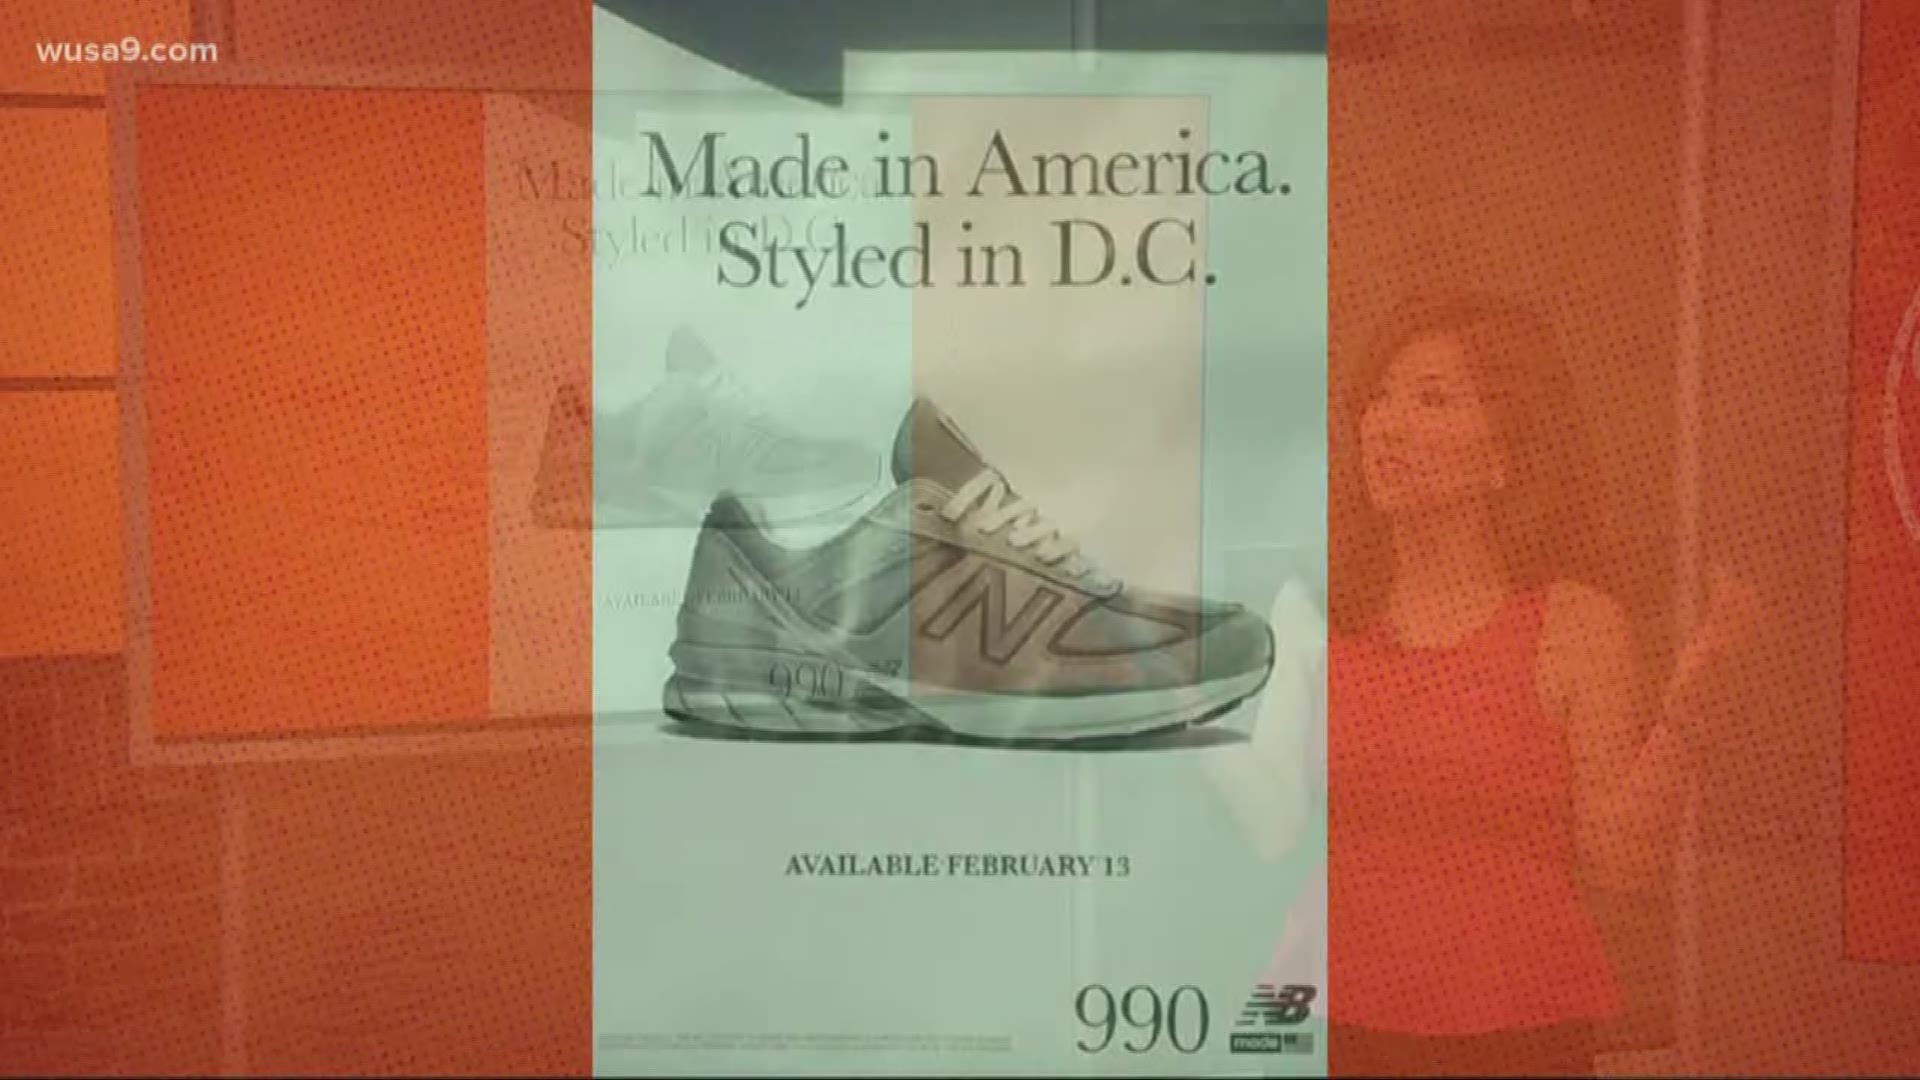 New Balance Made in USA - Truth in Advertising